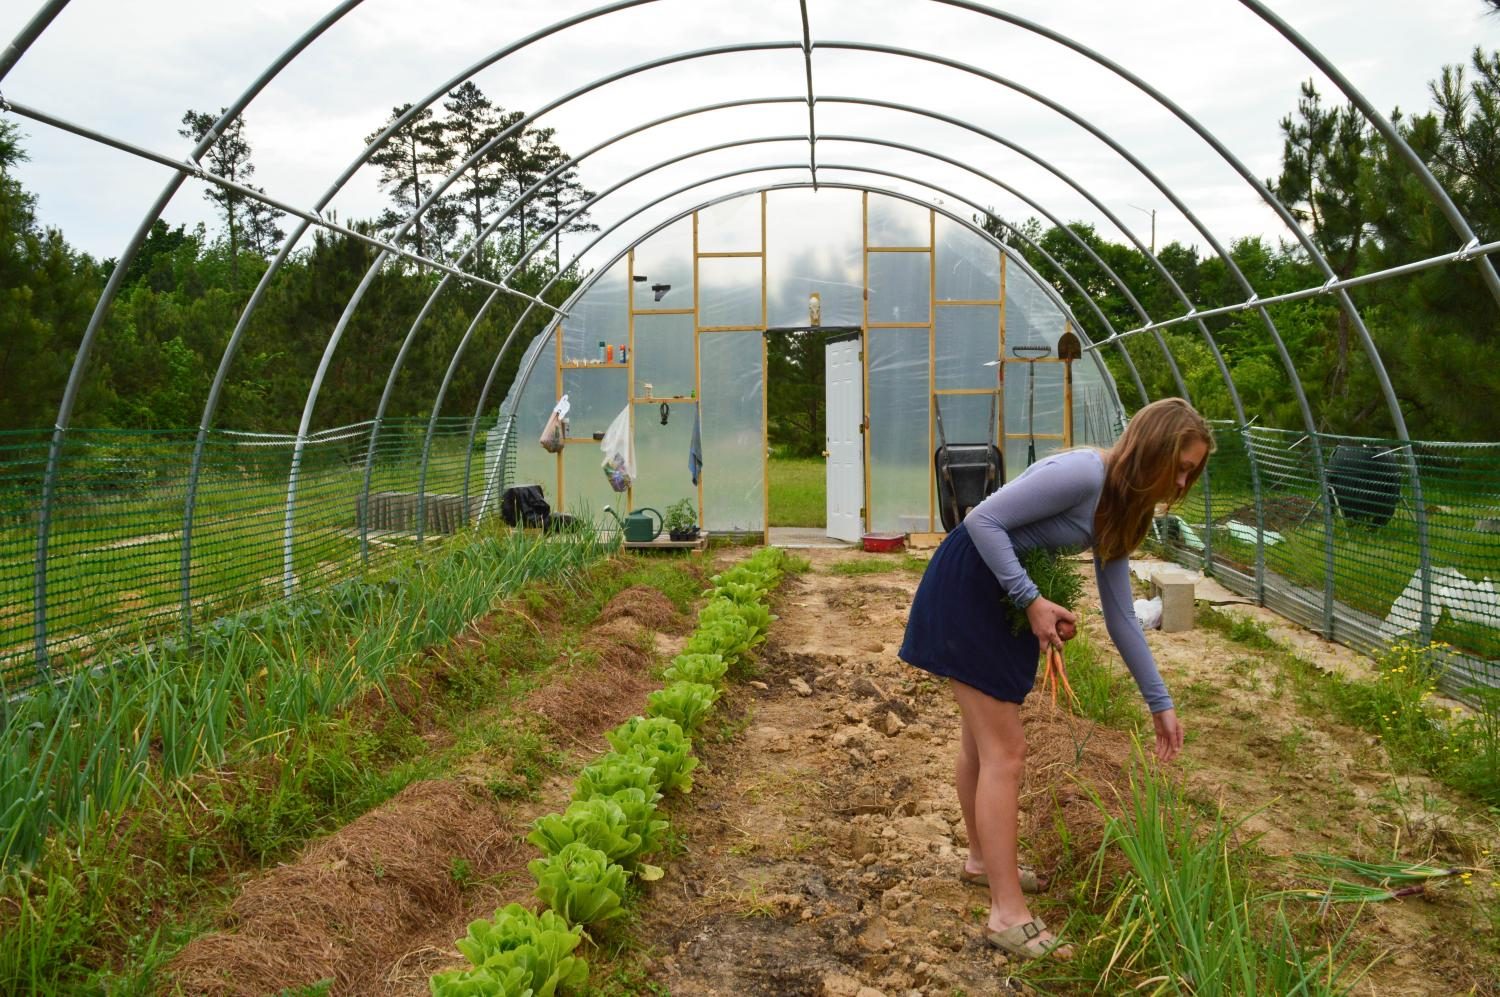 Anna Besh picks carrots. Students came face-to-face with the real-world challenges of running a small scale farm.